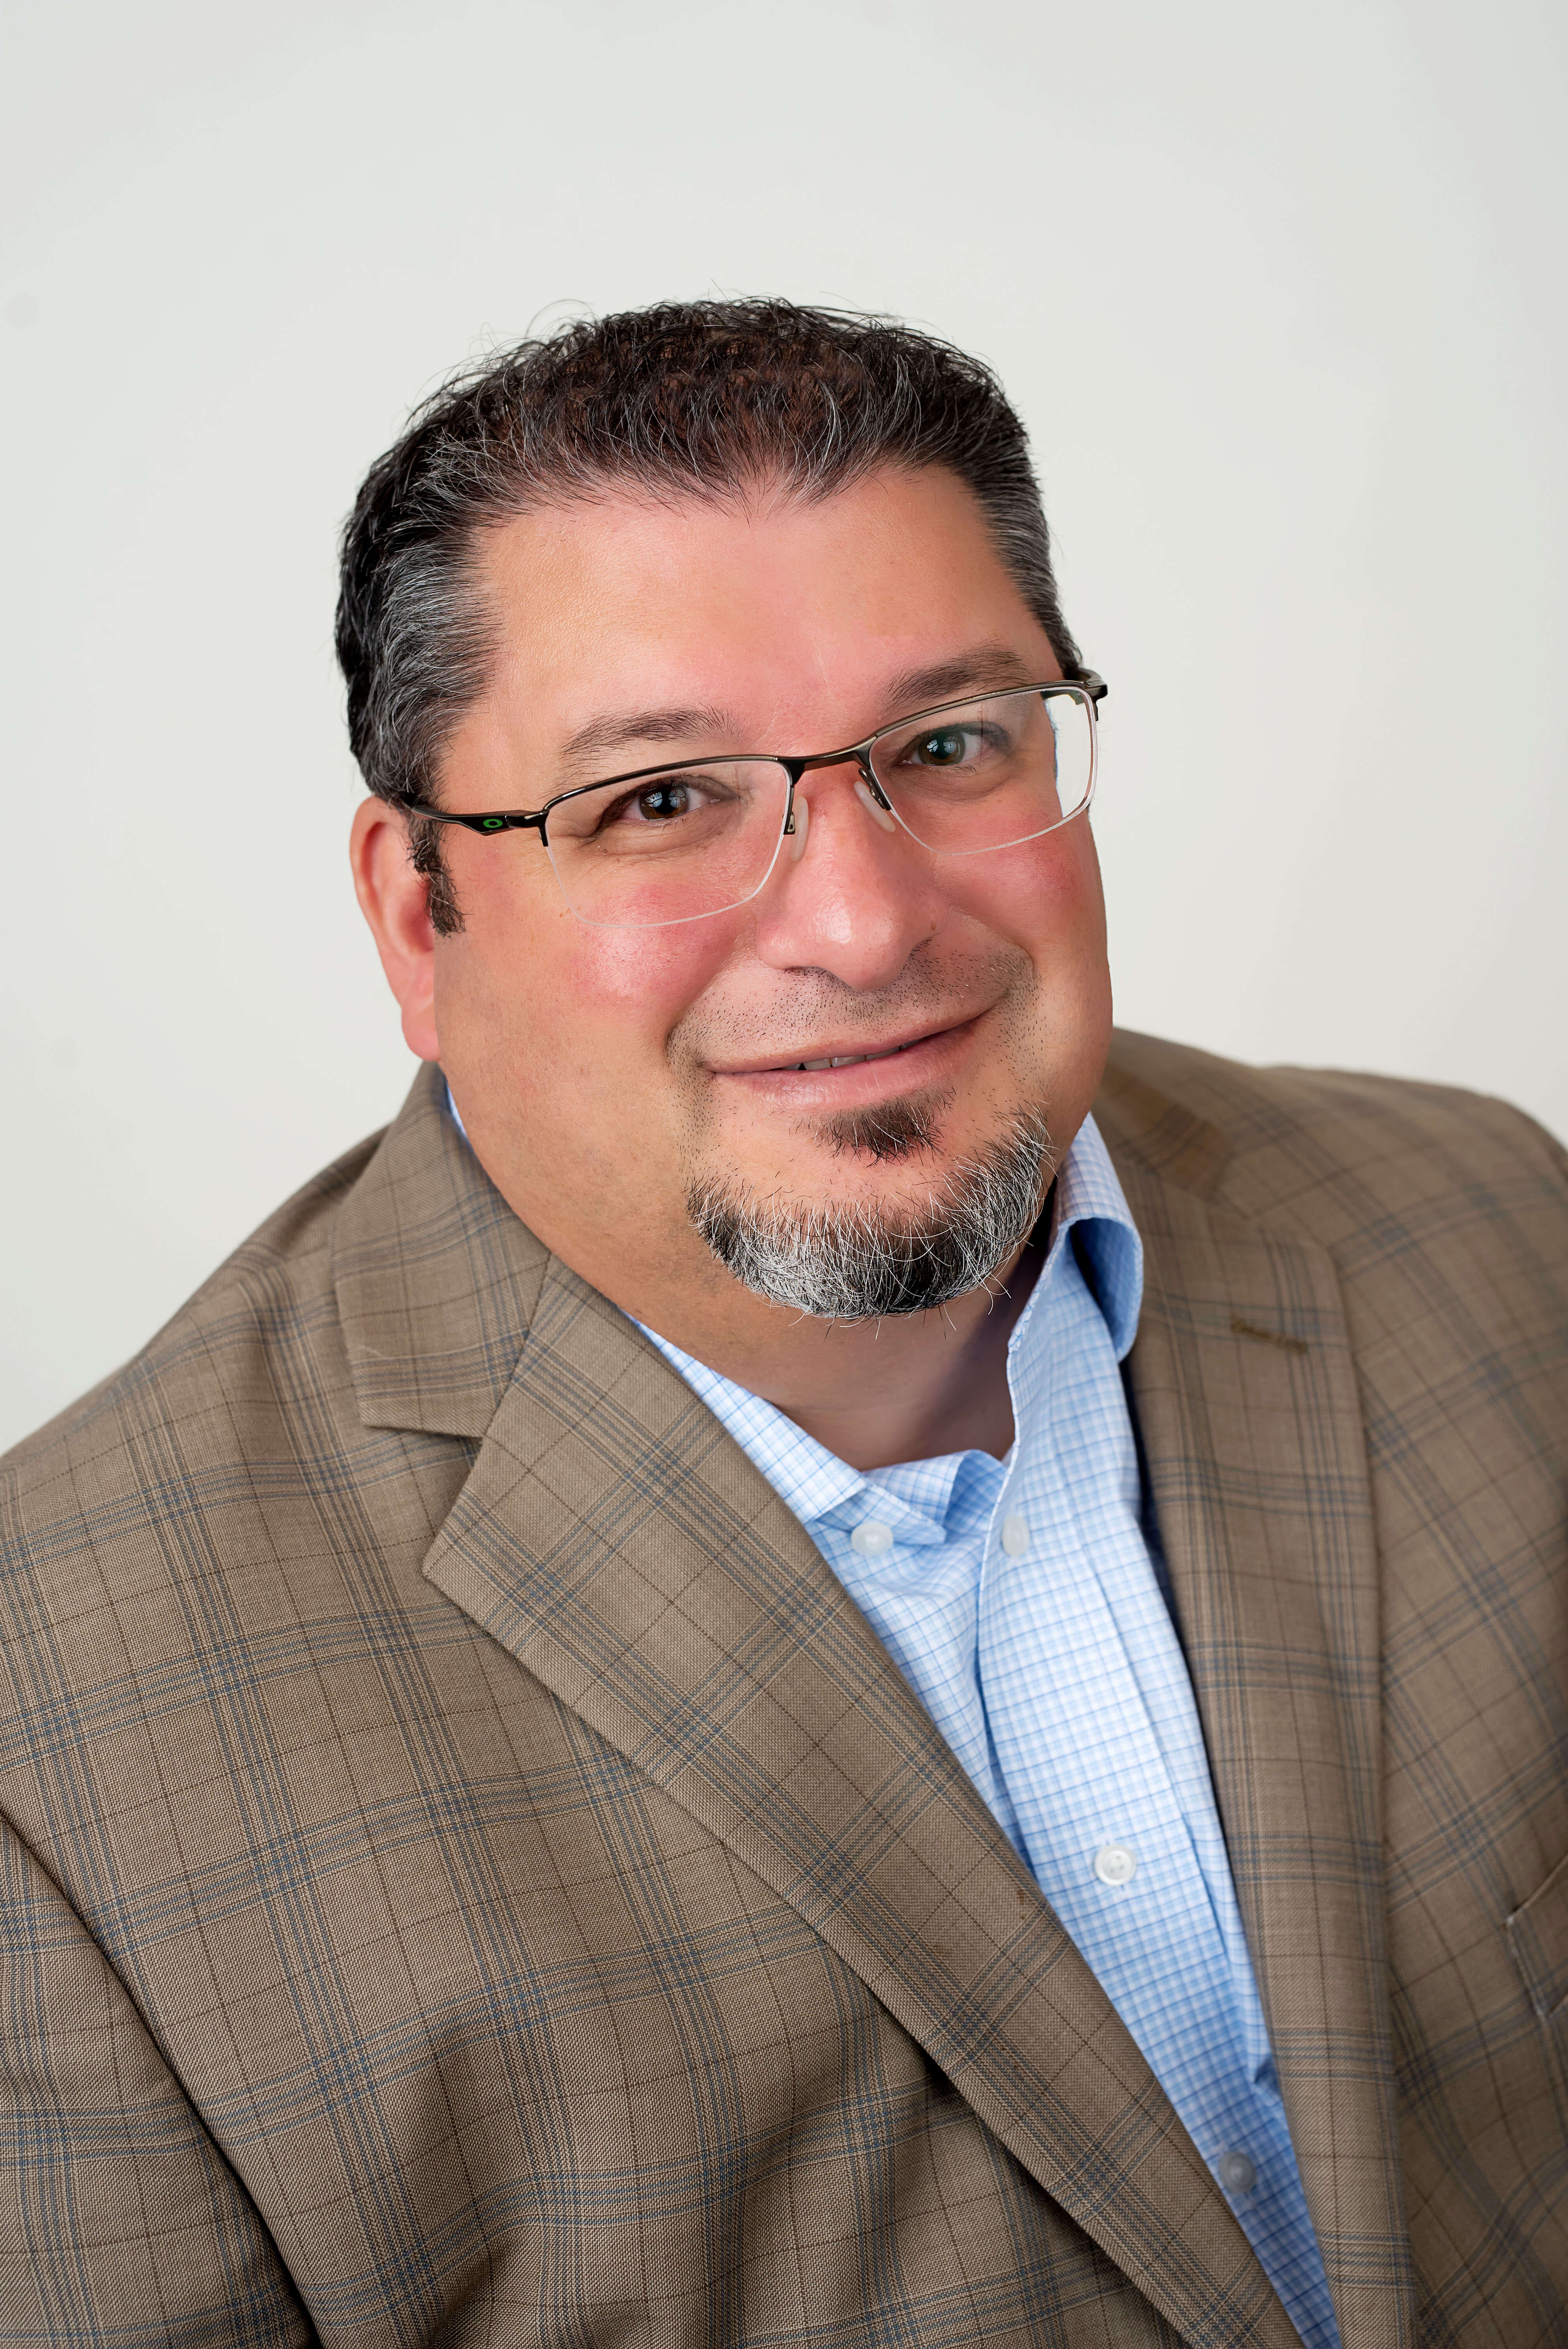 David Gulli Joins CNSI as Vice President of Software Quality Assurance